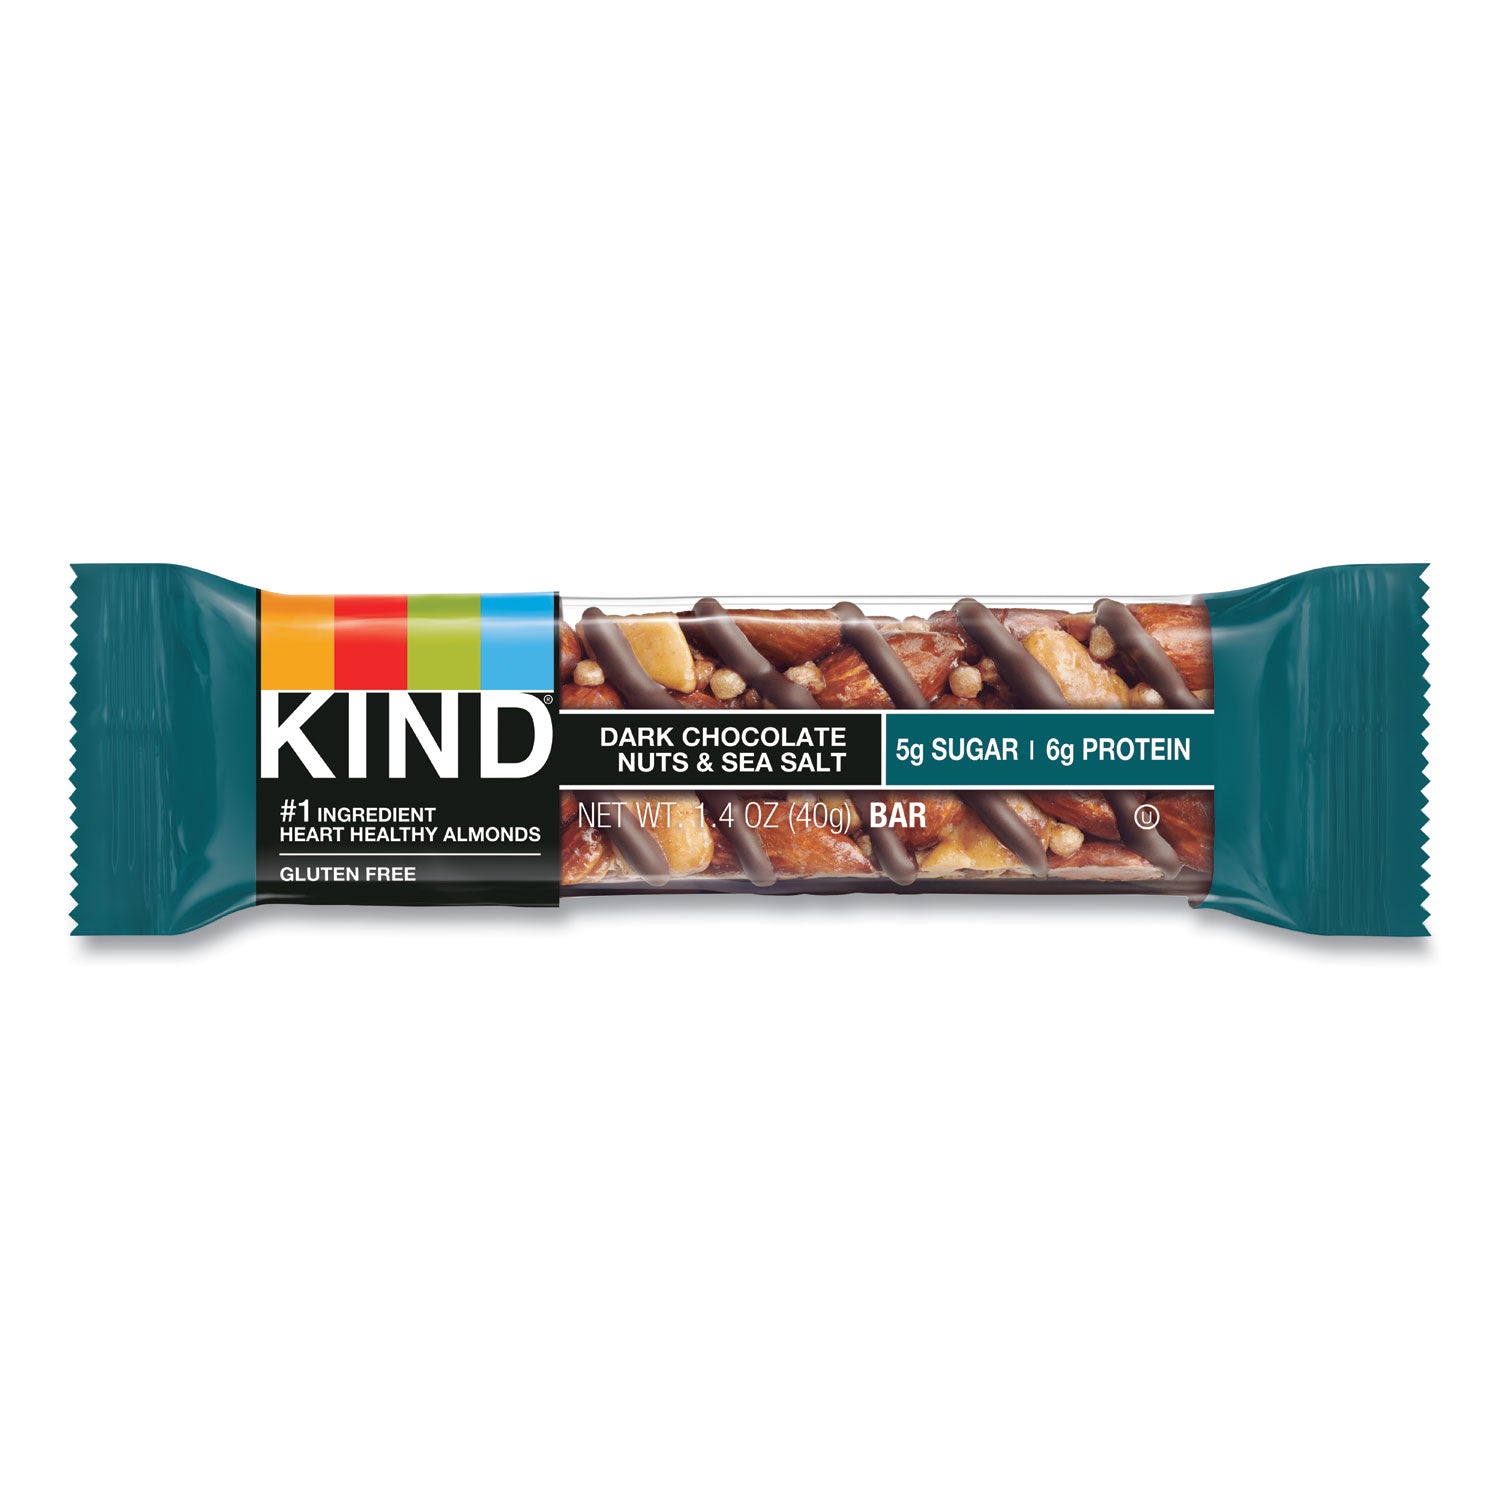 nuts-and-spices-bar-dark-chocolate-nuts-and-sea-salt-14-oz-12-box_knd17851 - 2